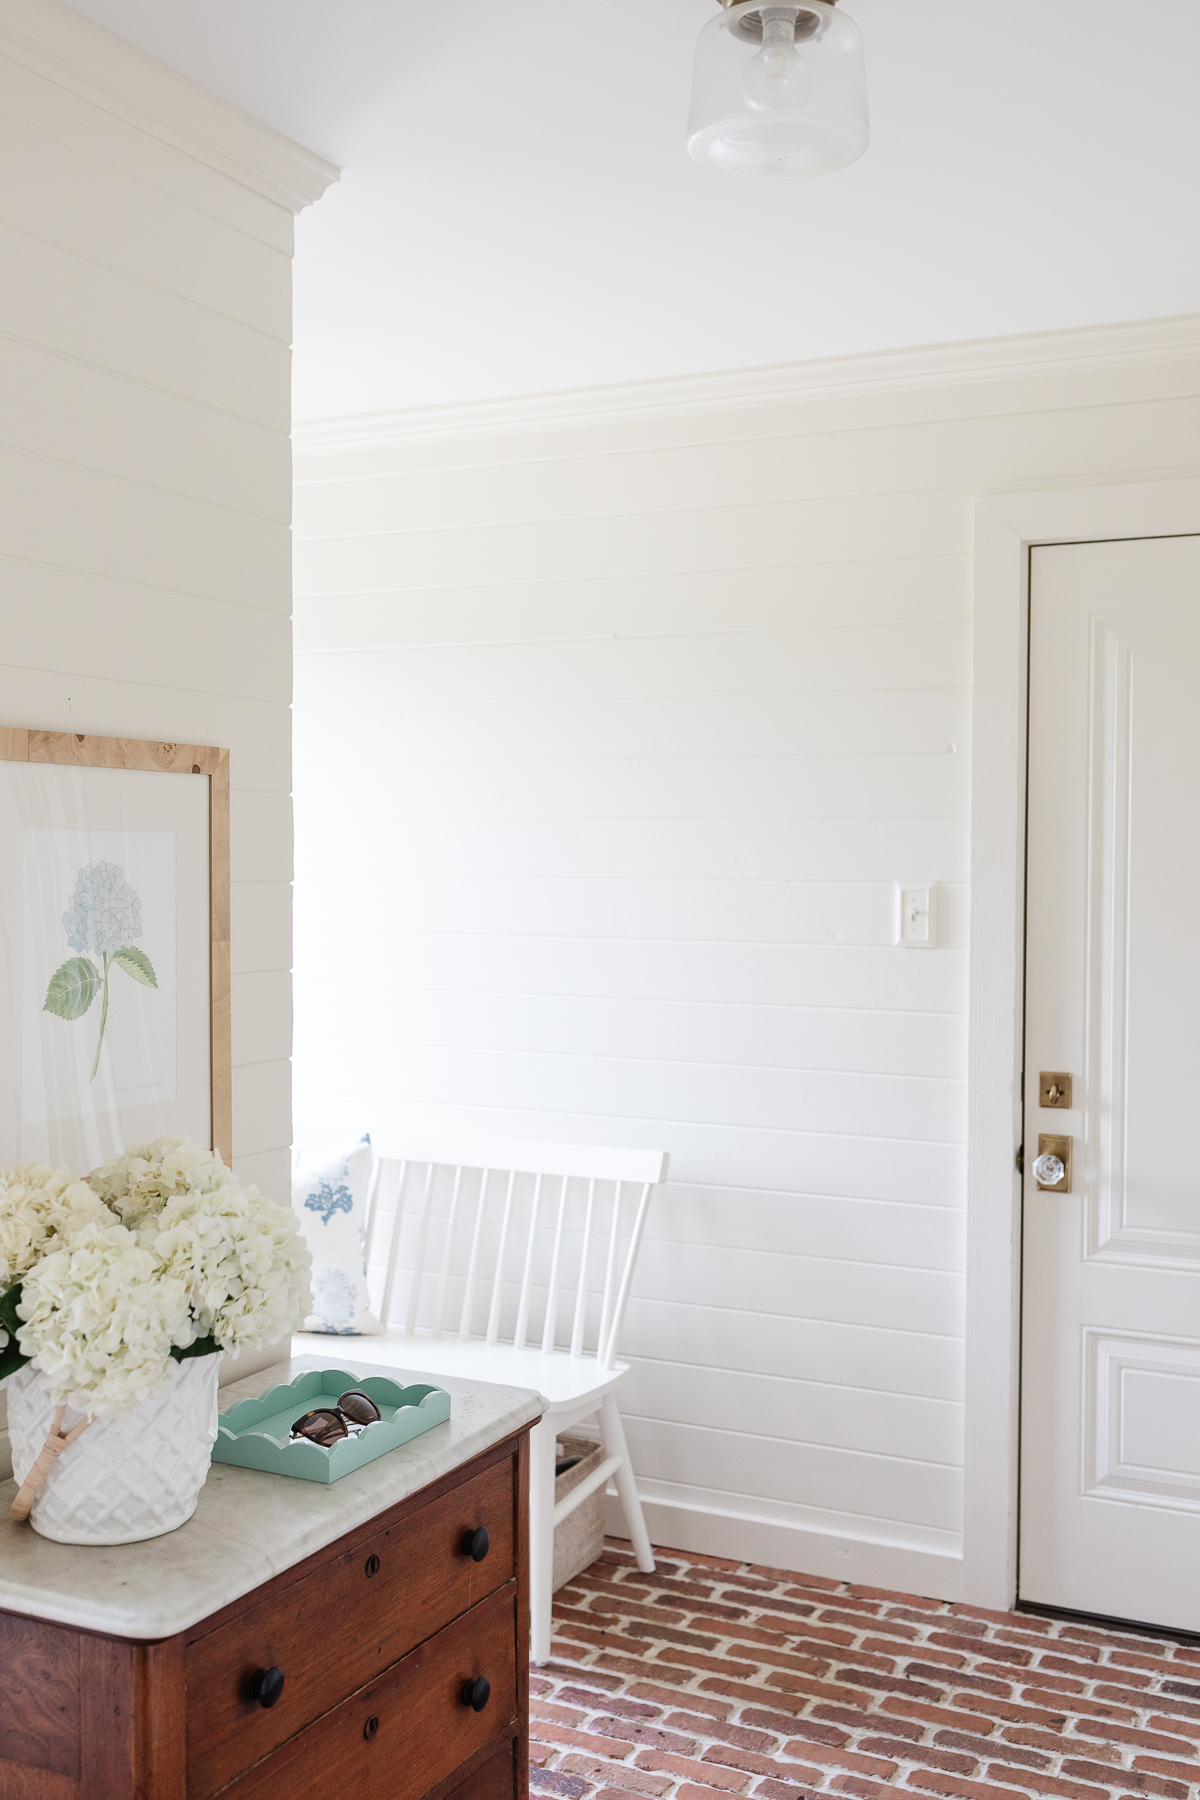 A mudroom with an antique chest and hydrangeas in a vase